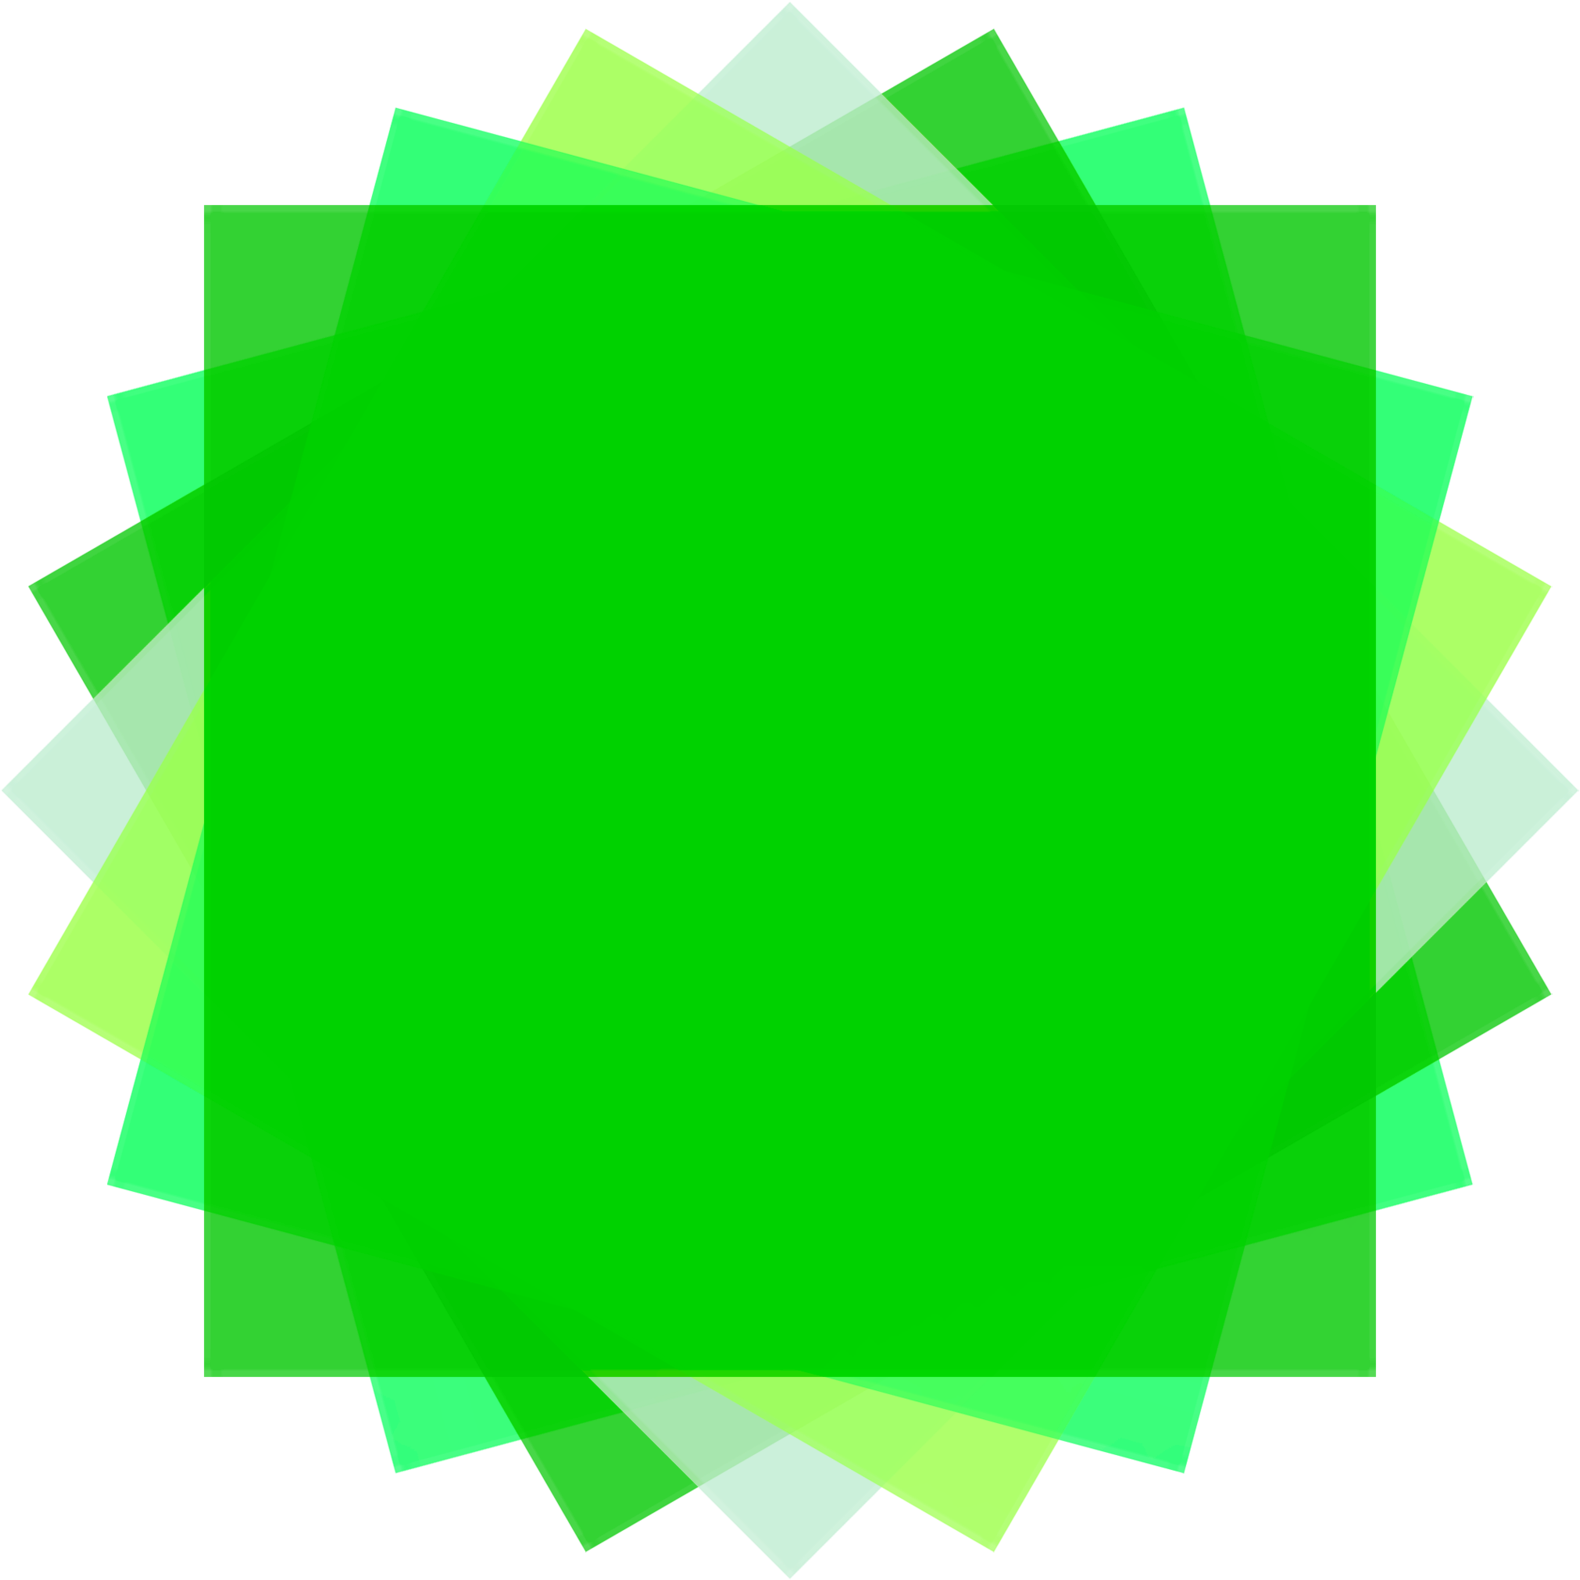 A Green Square With White Squares